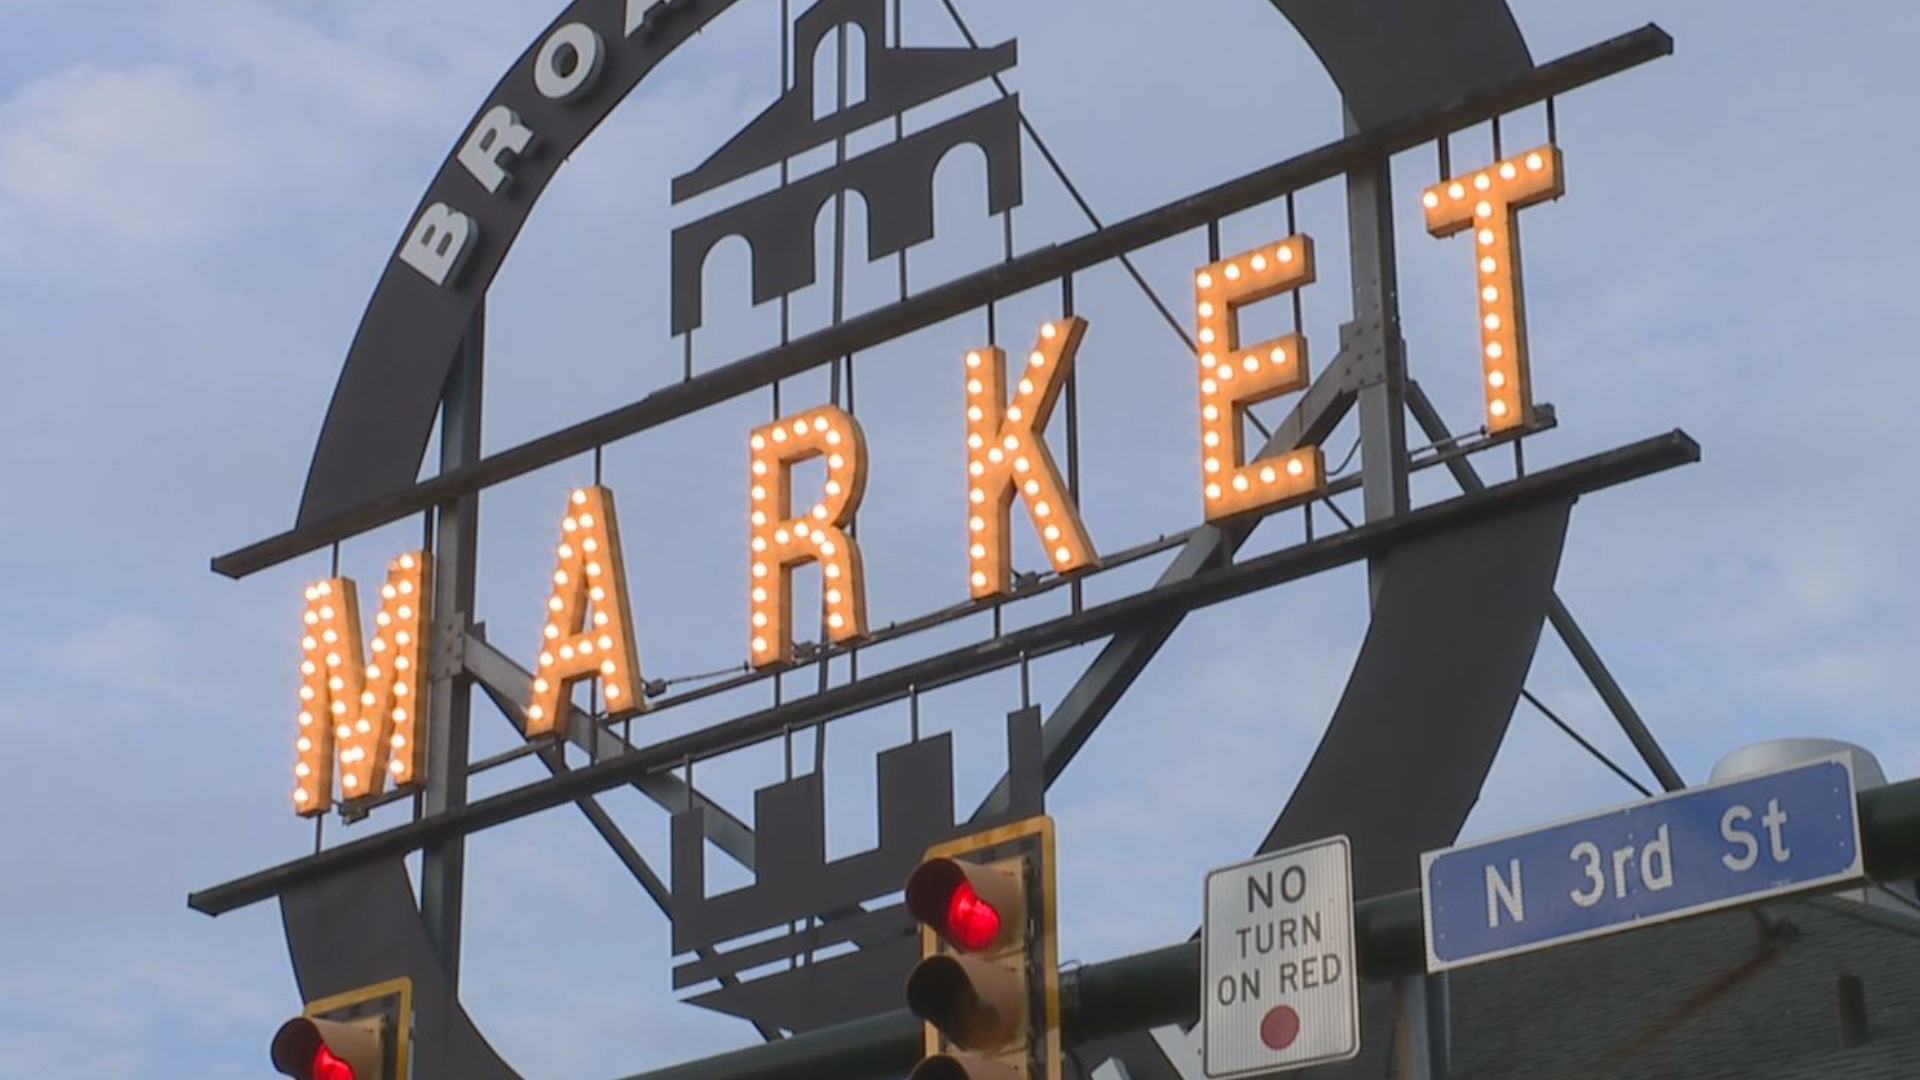 The market's main building will open until 6 p.m. on Saturdays.